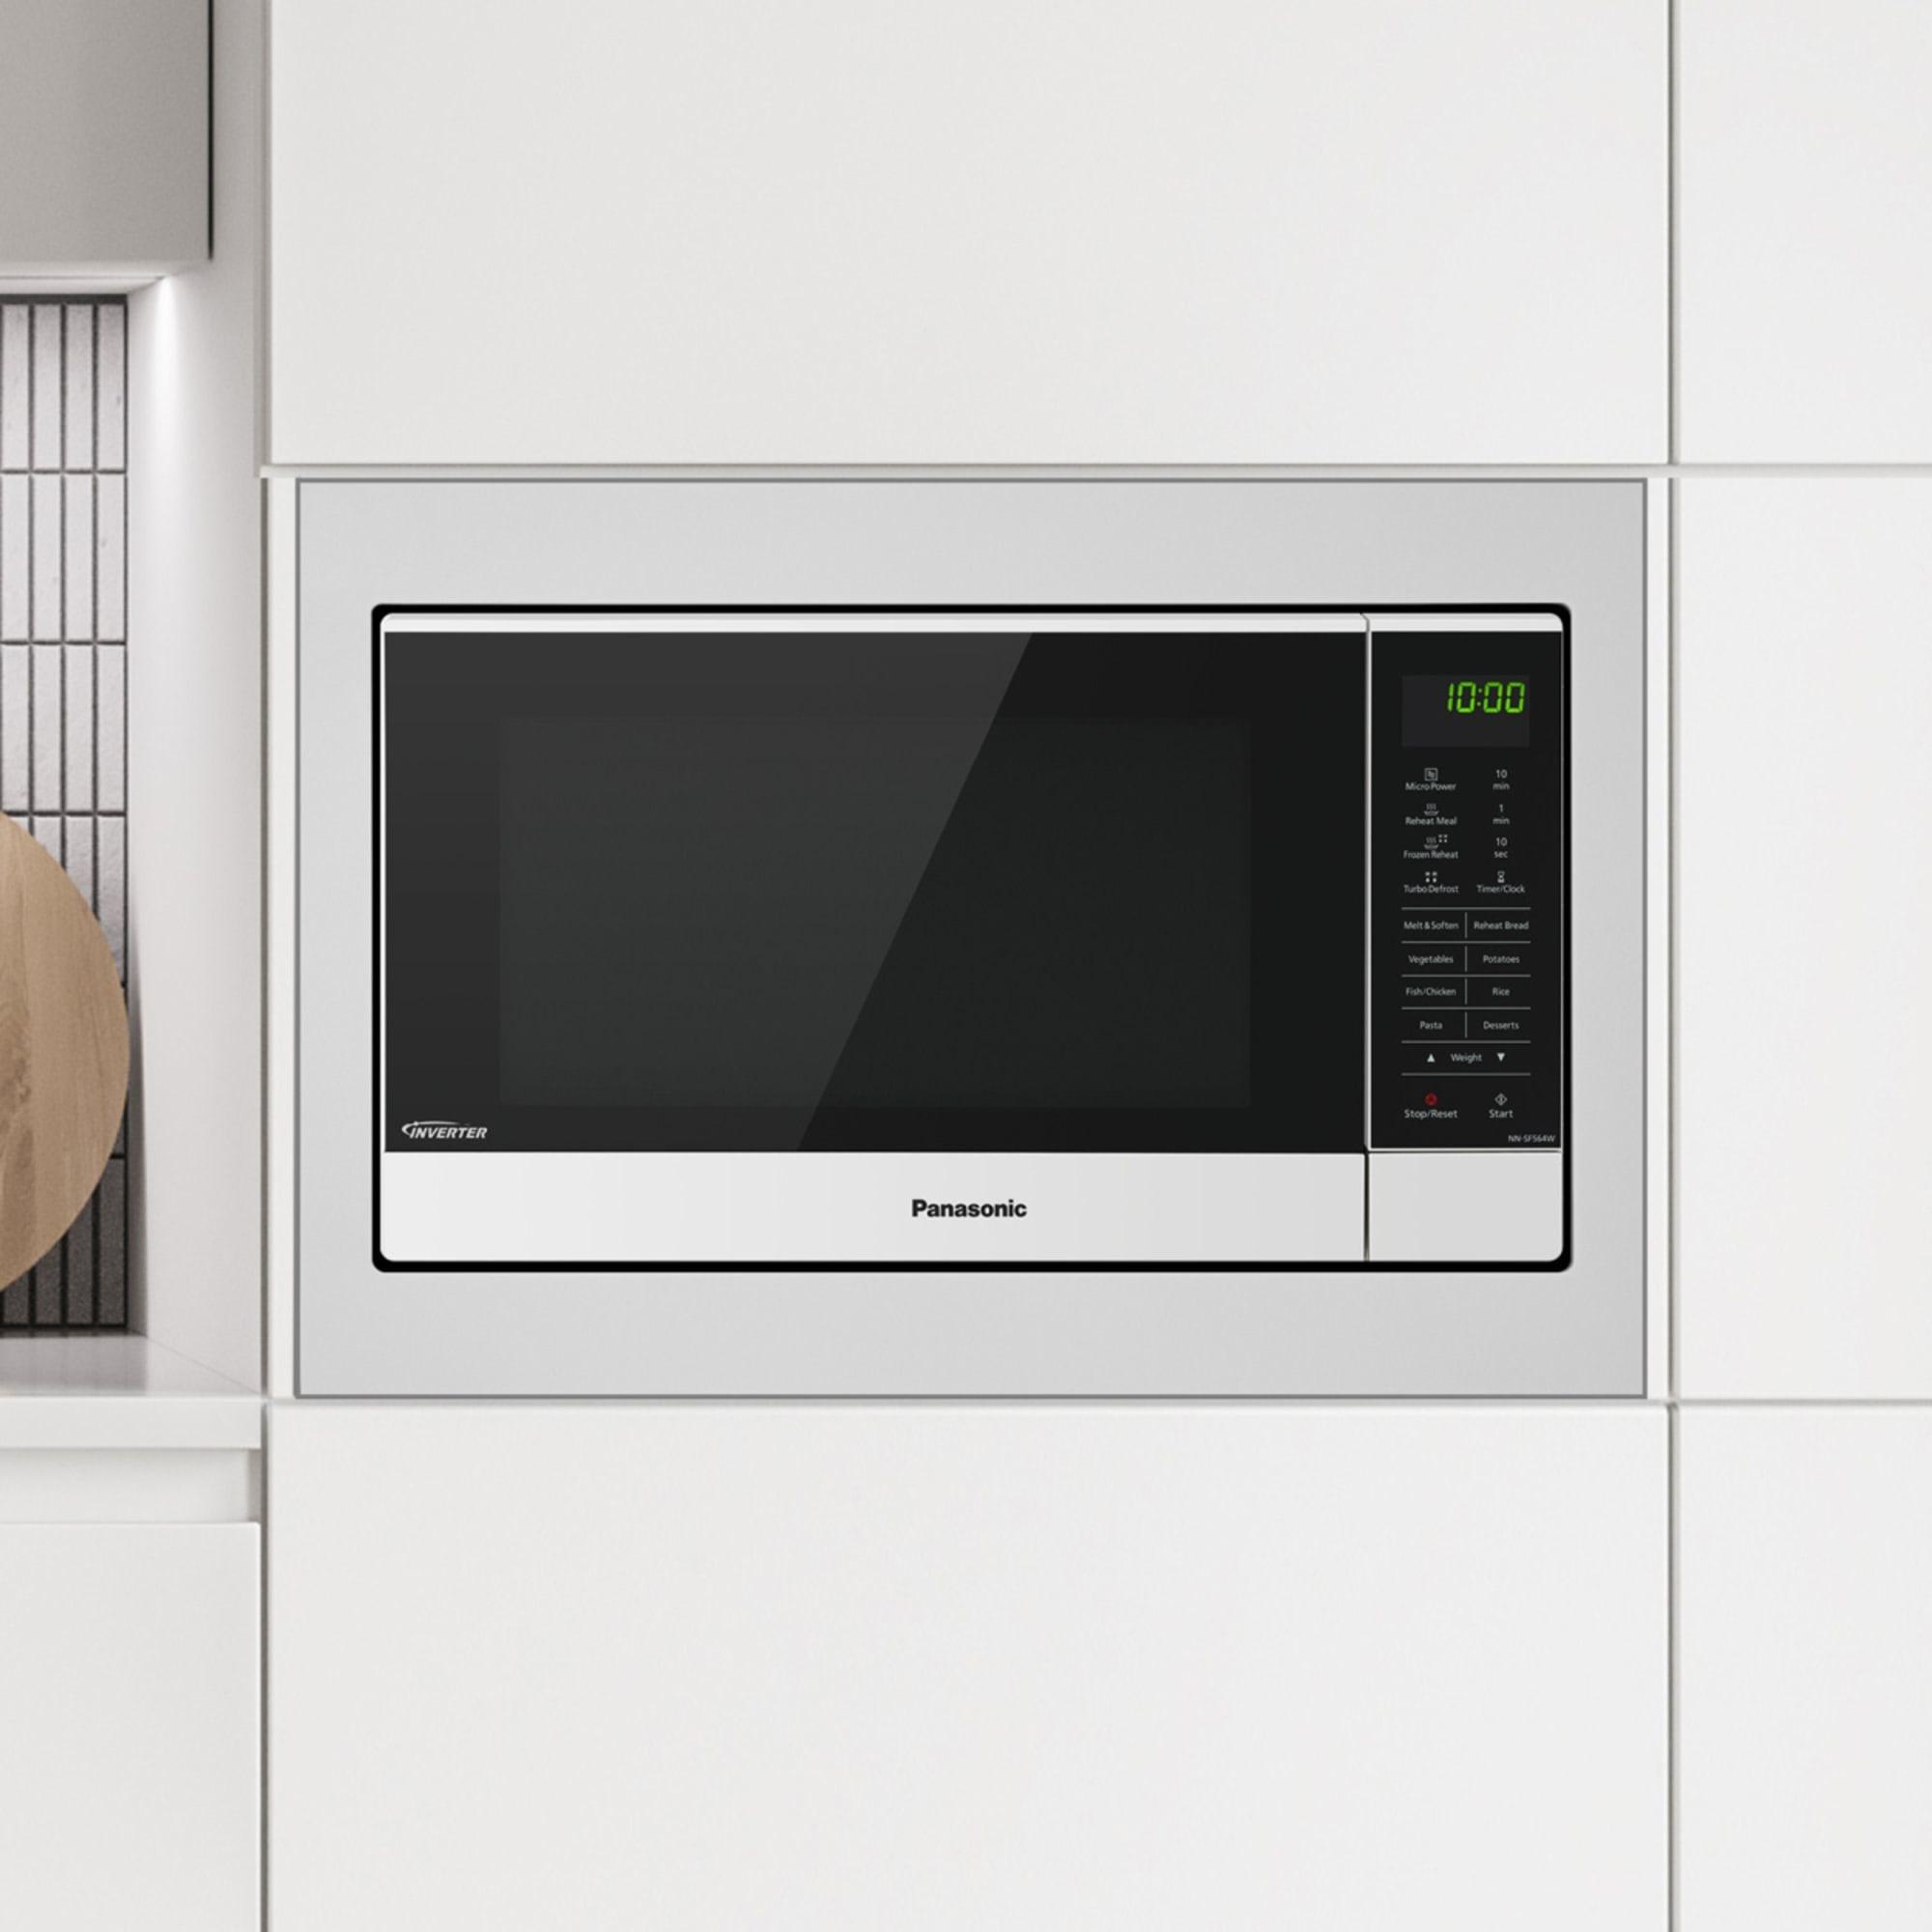 Panasonic Flatbed Microwave Oven 27L White Image 2